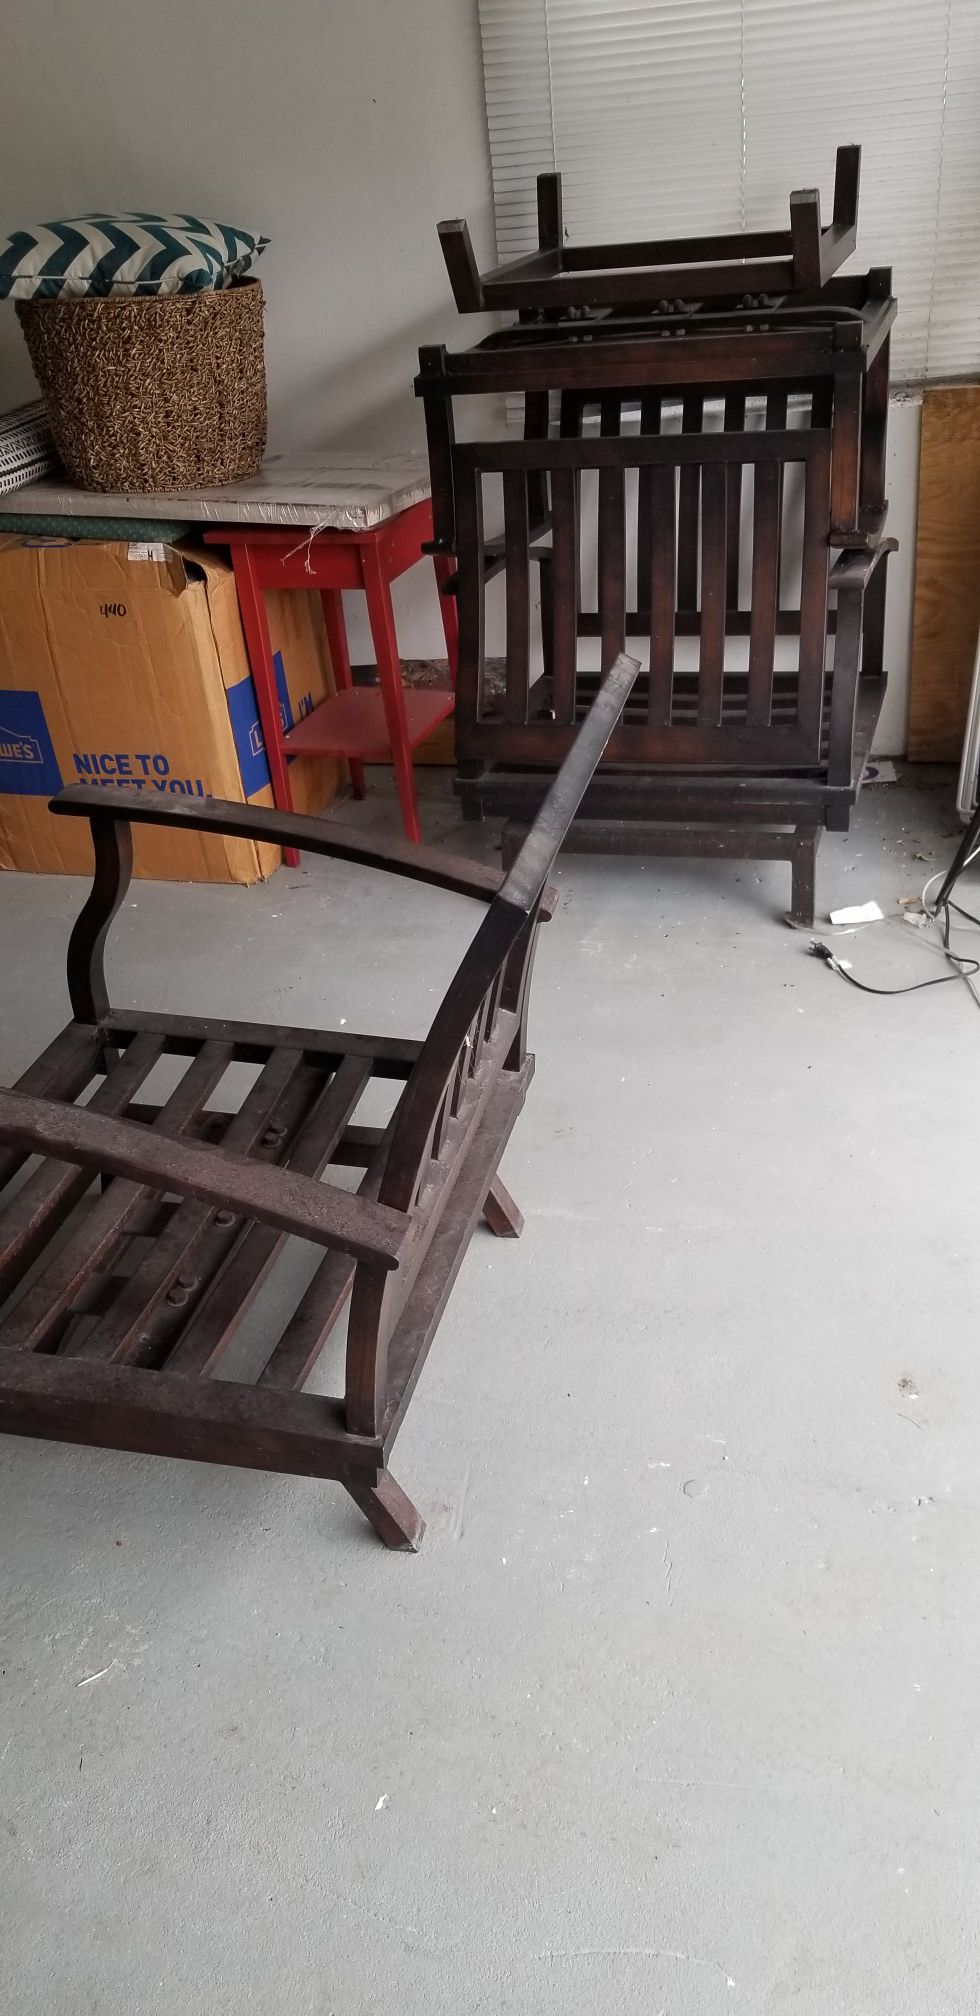 Barely used outside patio chairs